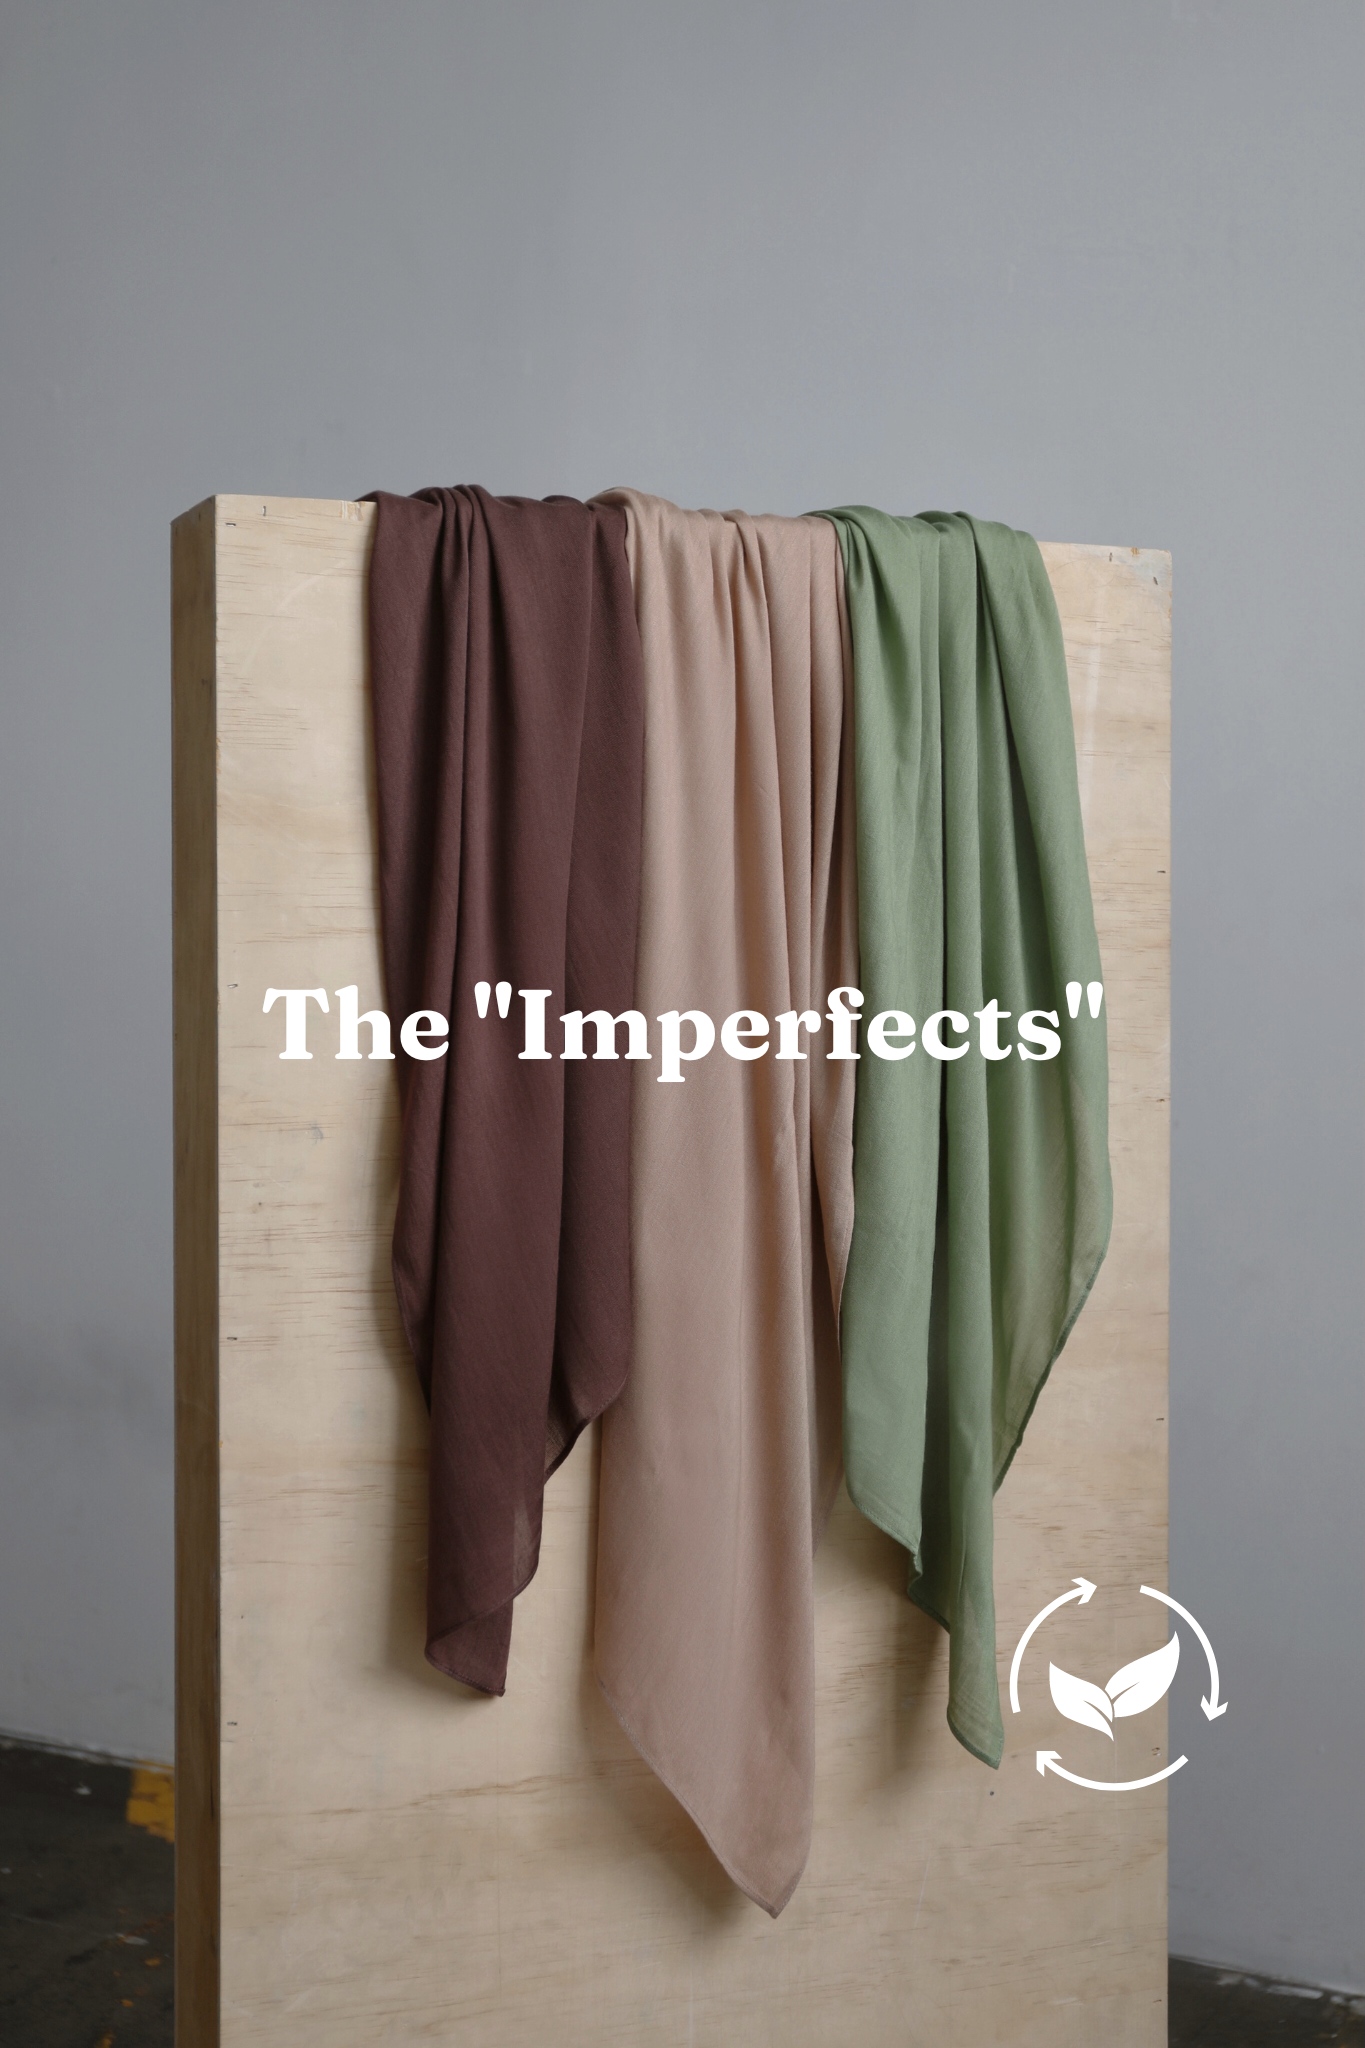 The "Imperfects"